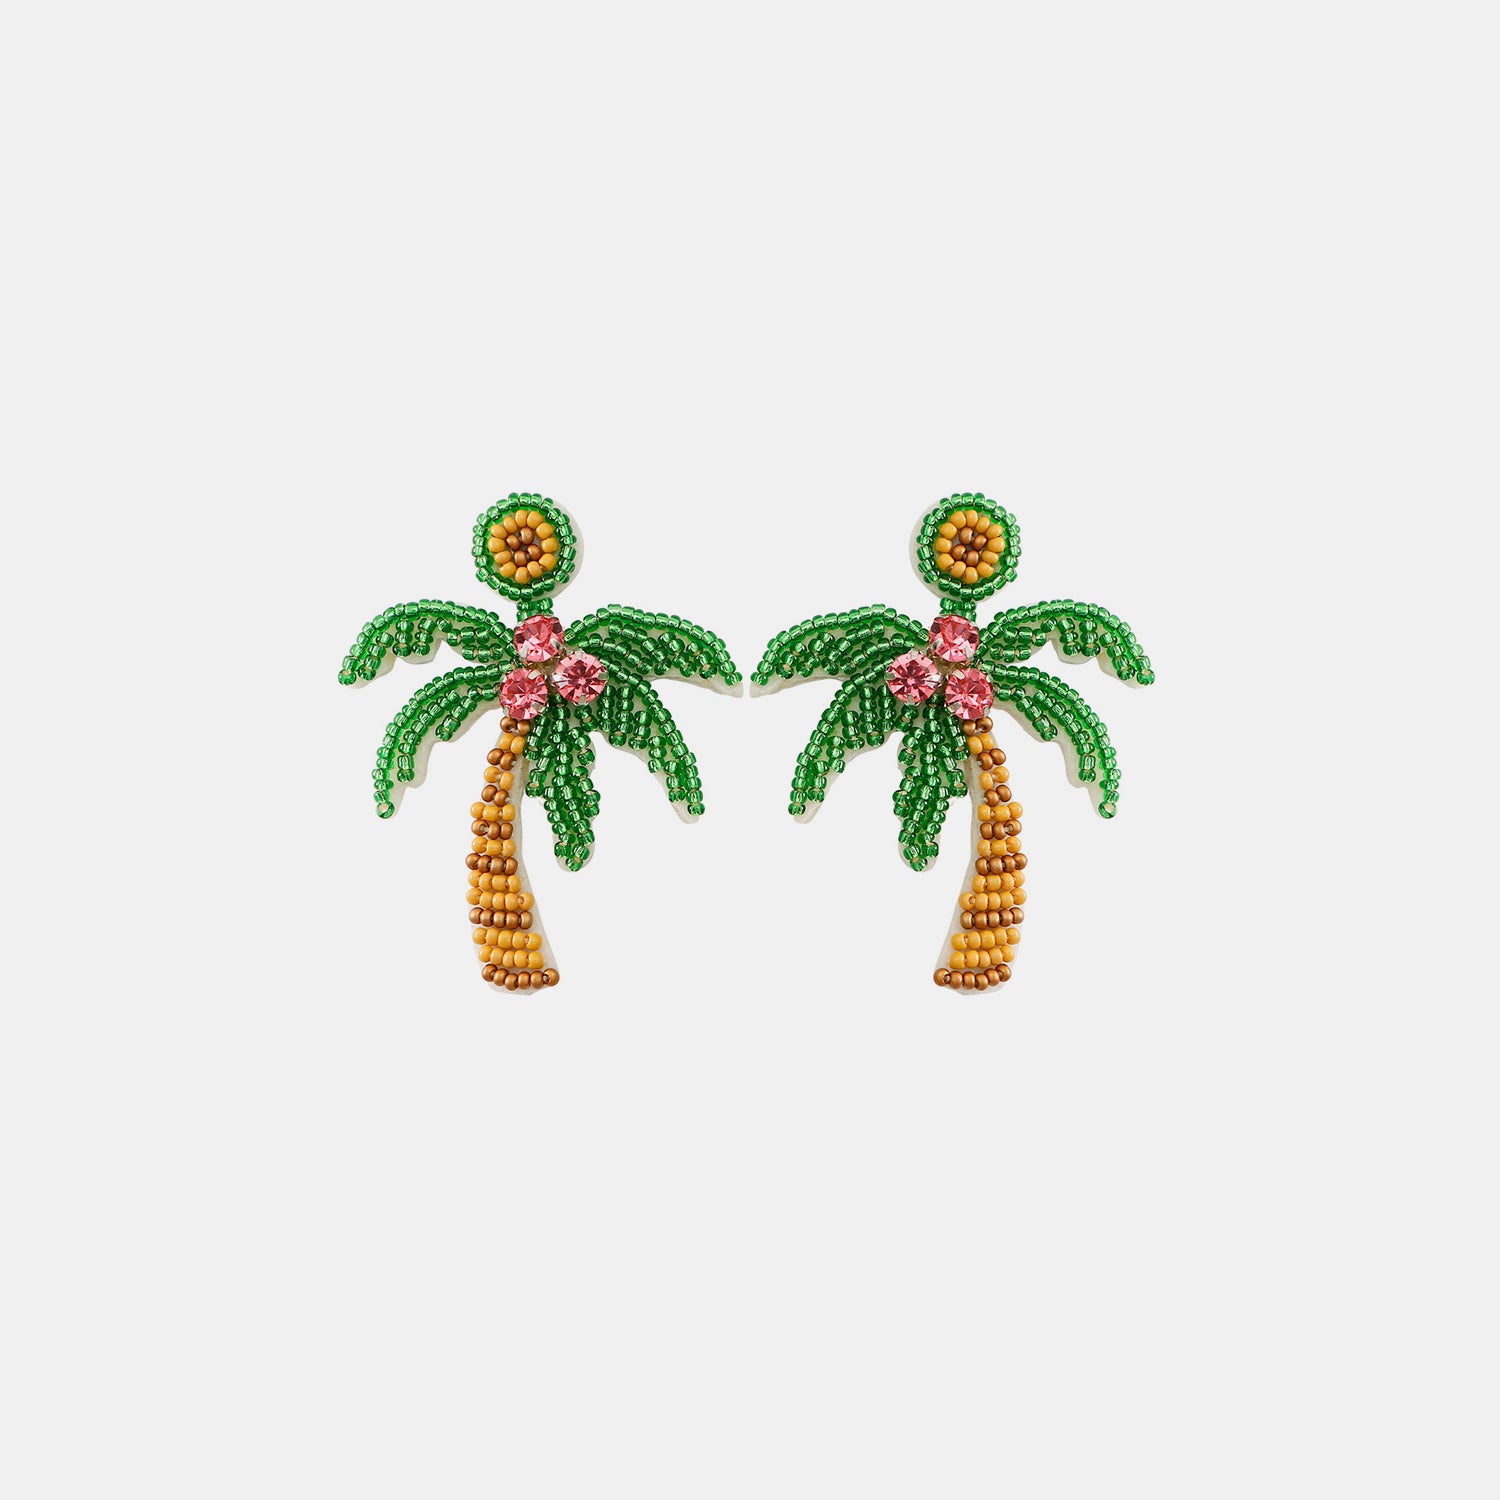 A woman exudes island grace with her stunning coconut tree beaded earrings, complementing her relaxed, seaside style with a touch of tropical elegance.